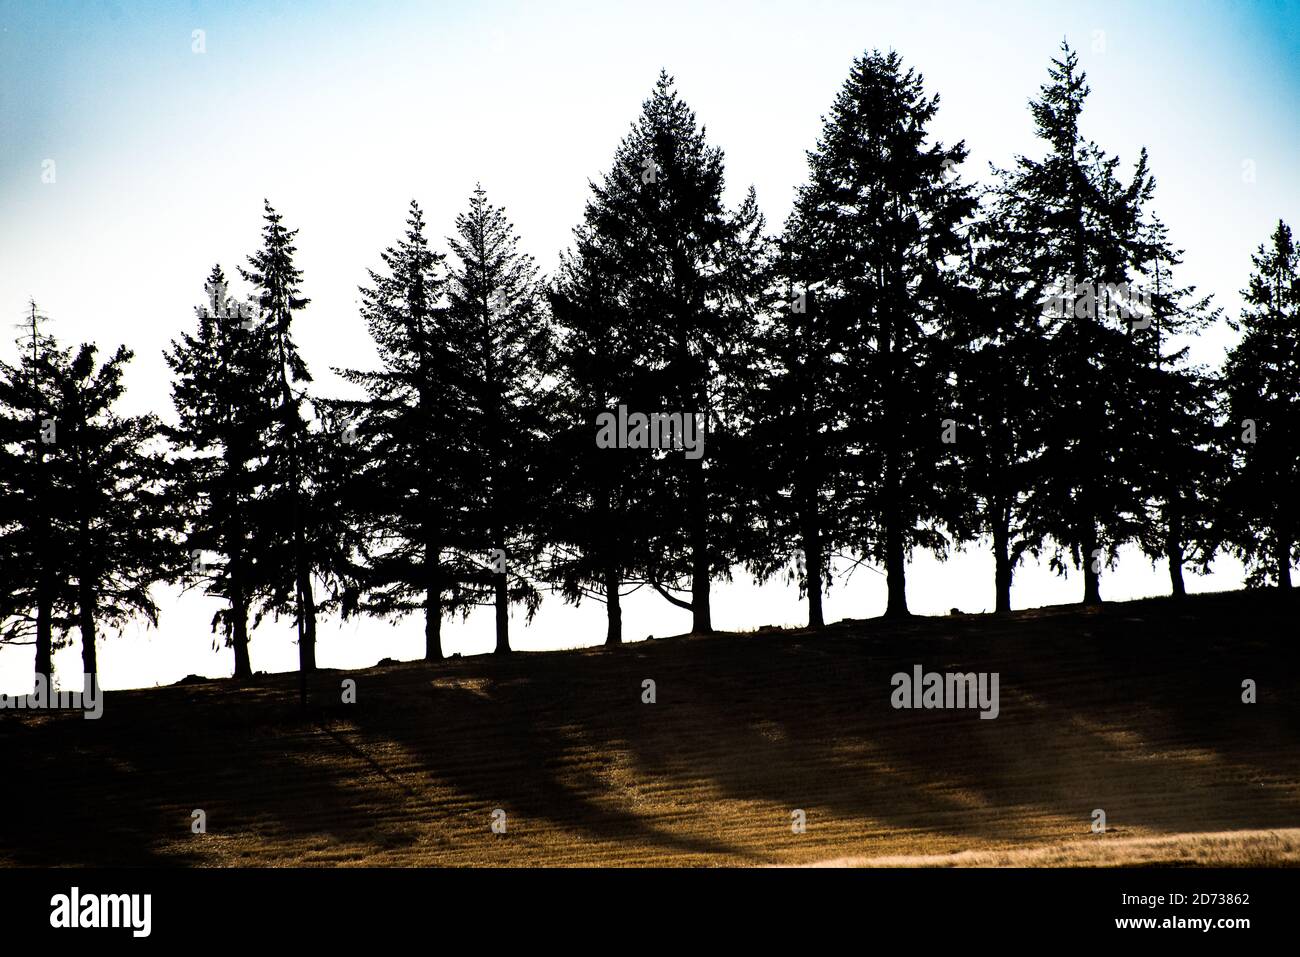 Silhouettes of a line of trees, Marion County, Oregon. Stock Photo